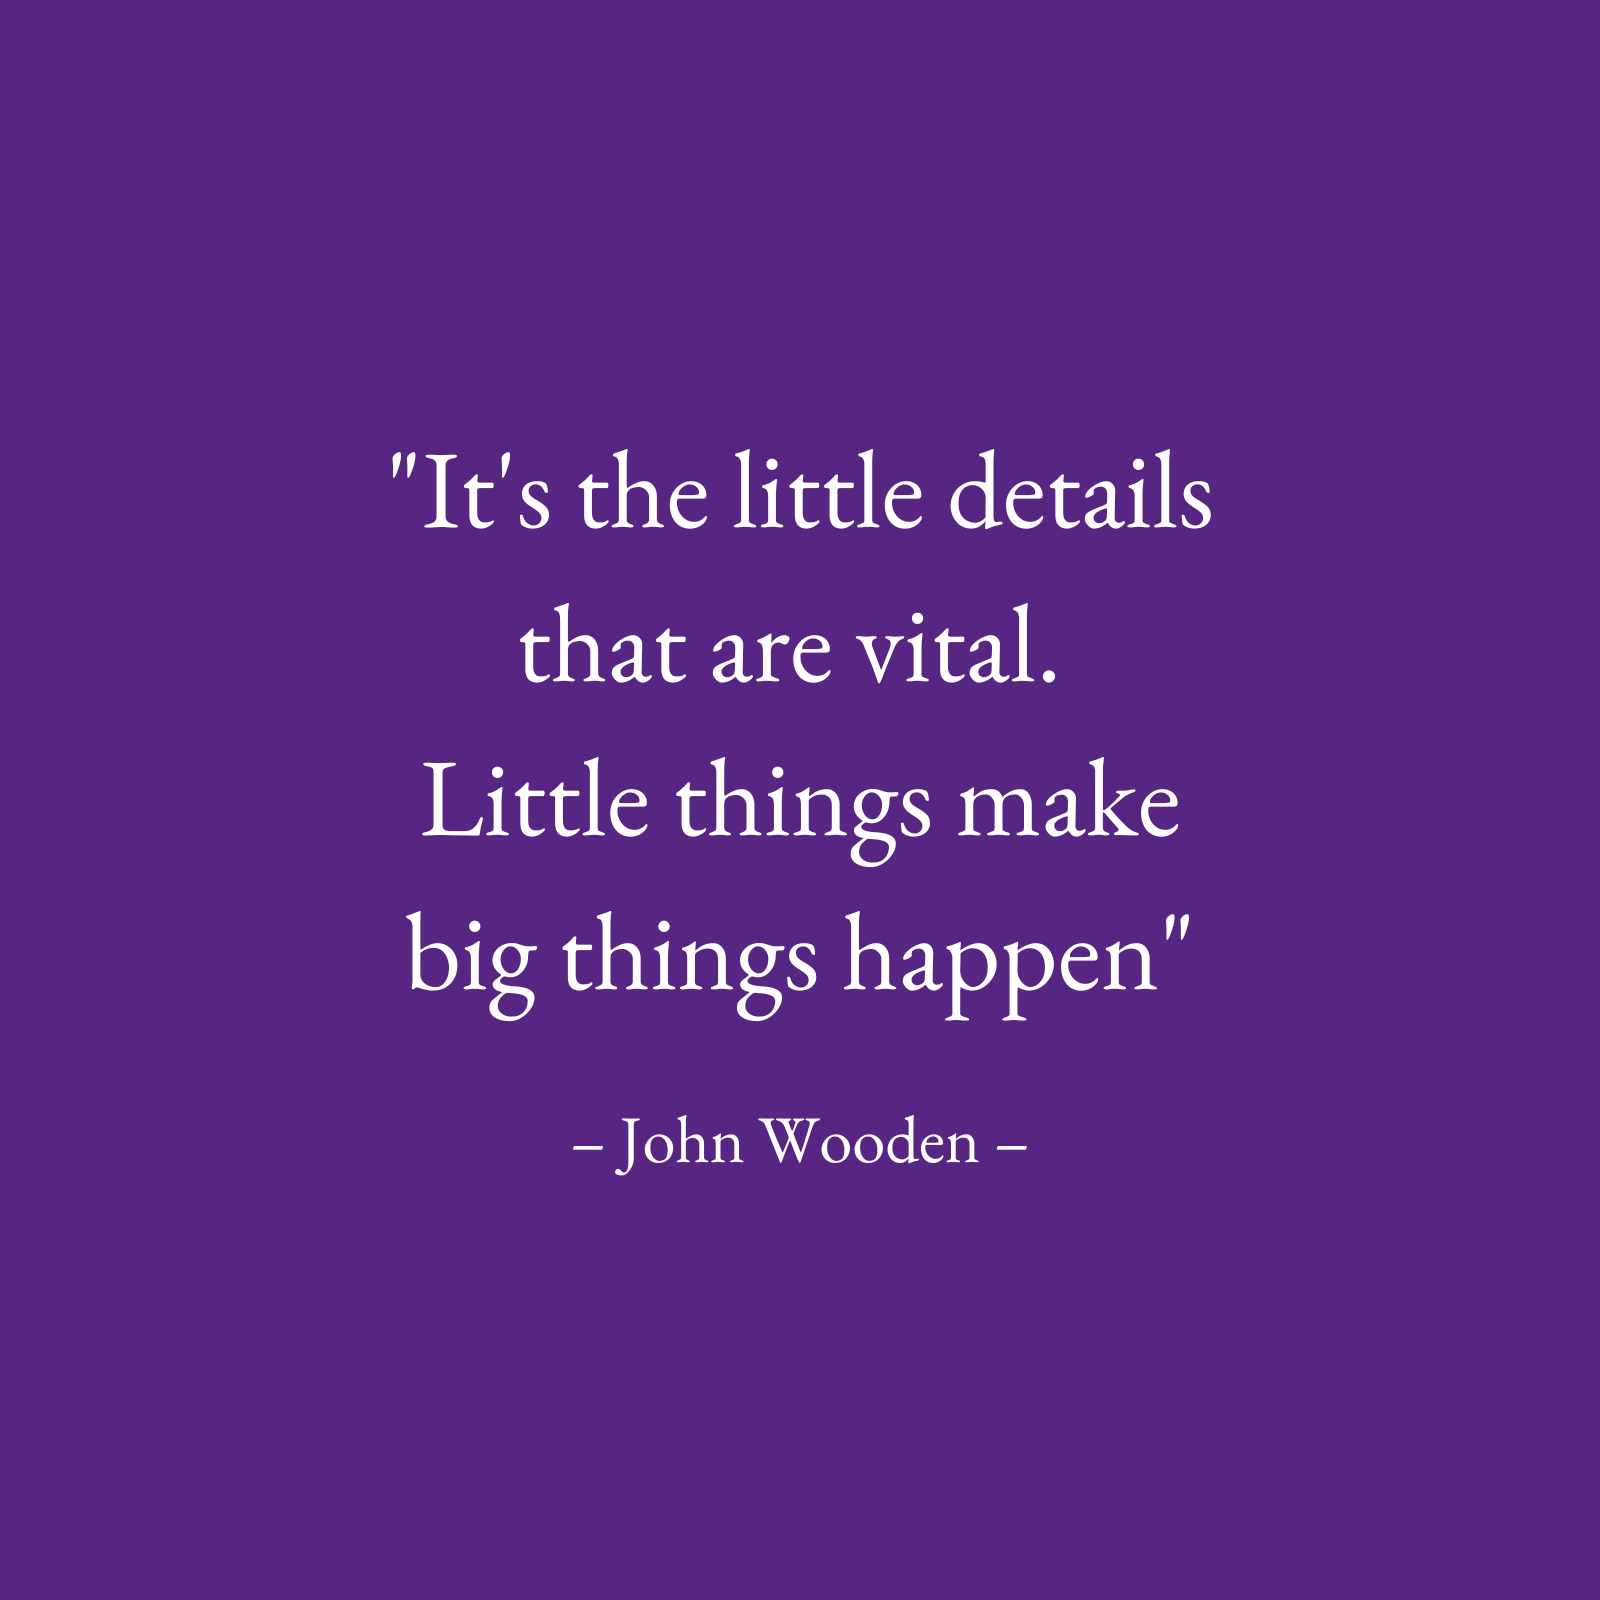 Image text only - quote: "It's the little details that are vital. Little things make big things happen" – John Wooden